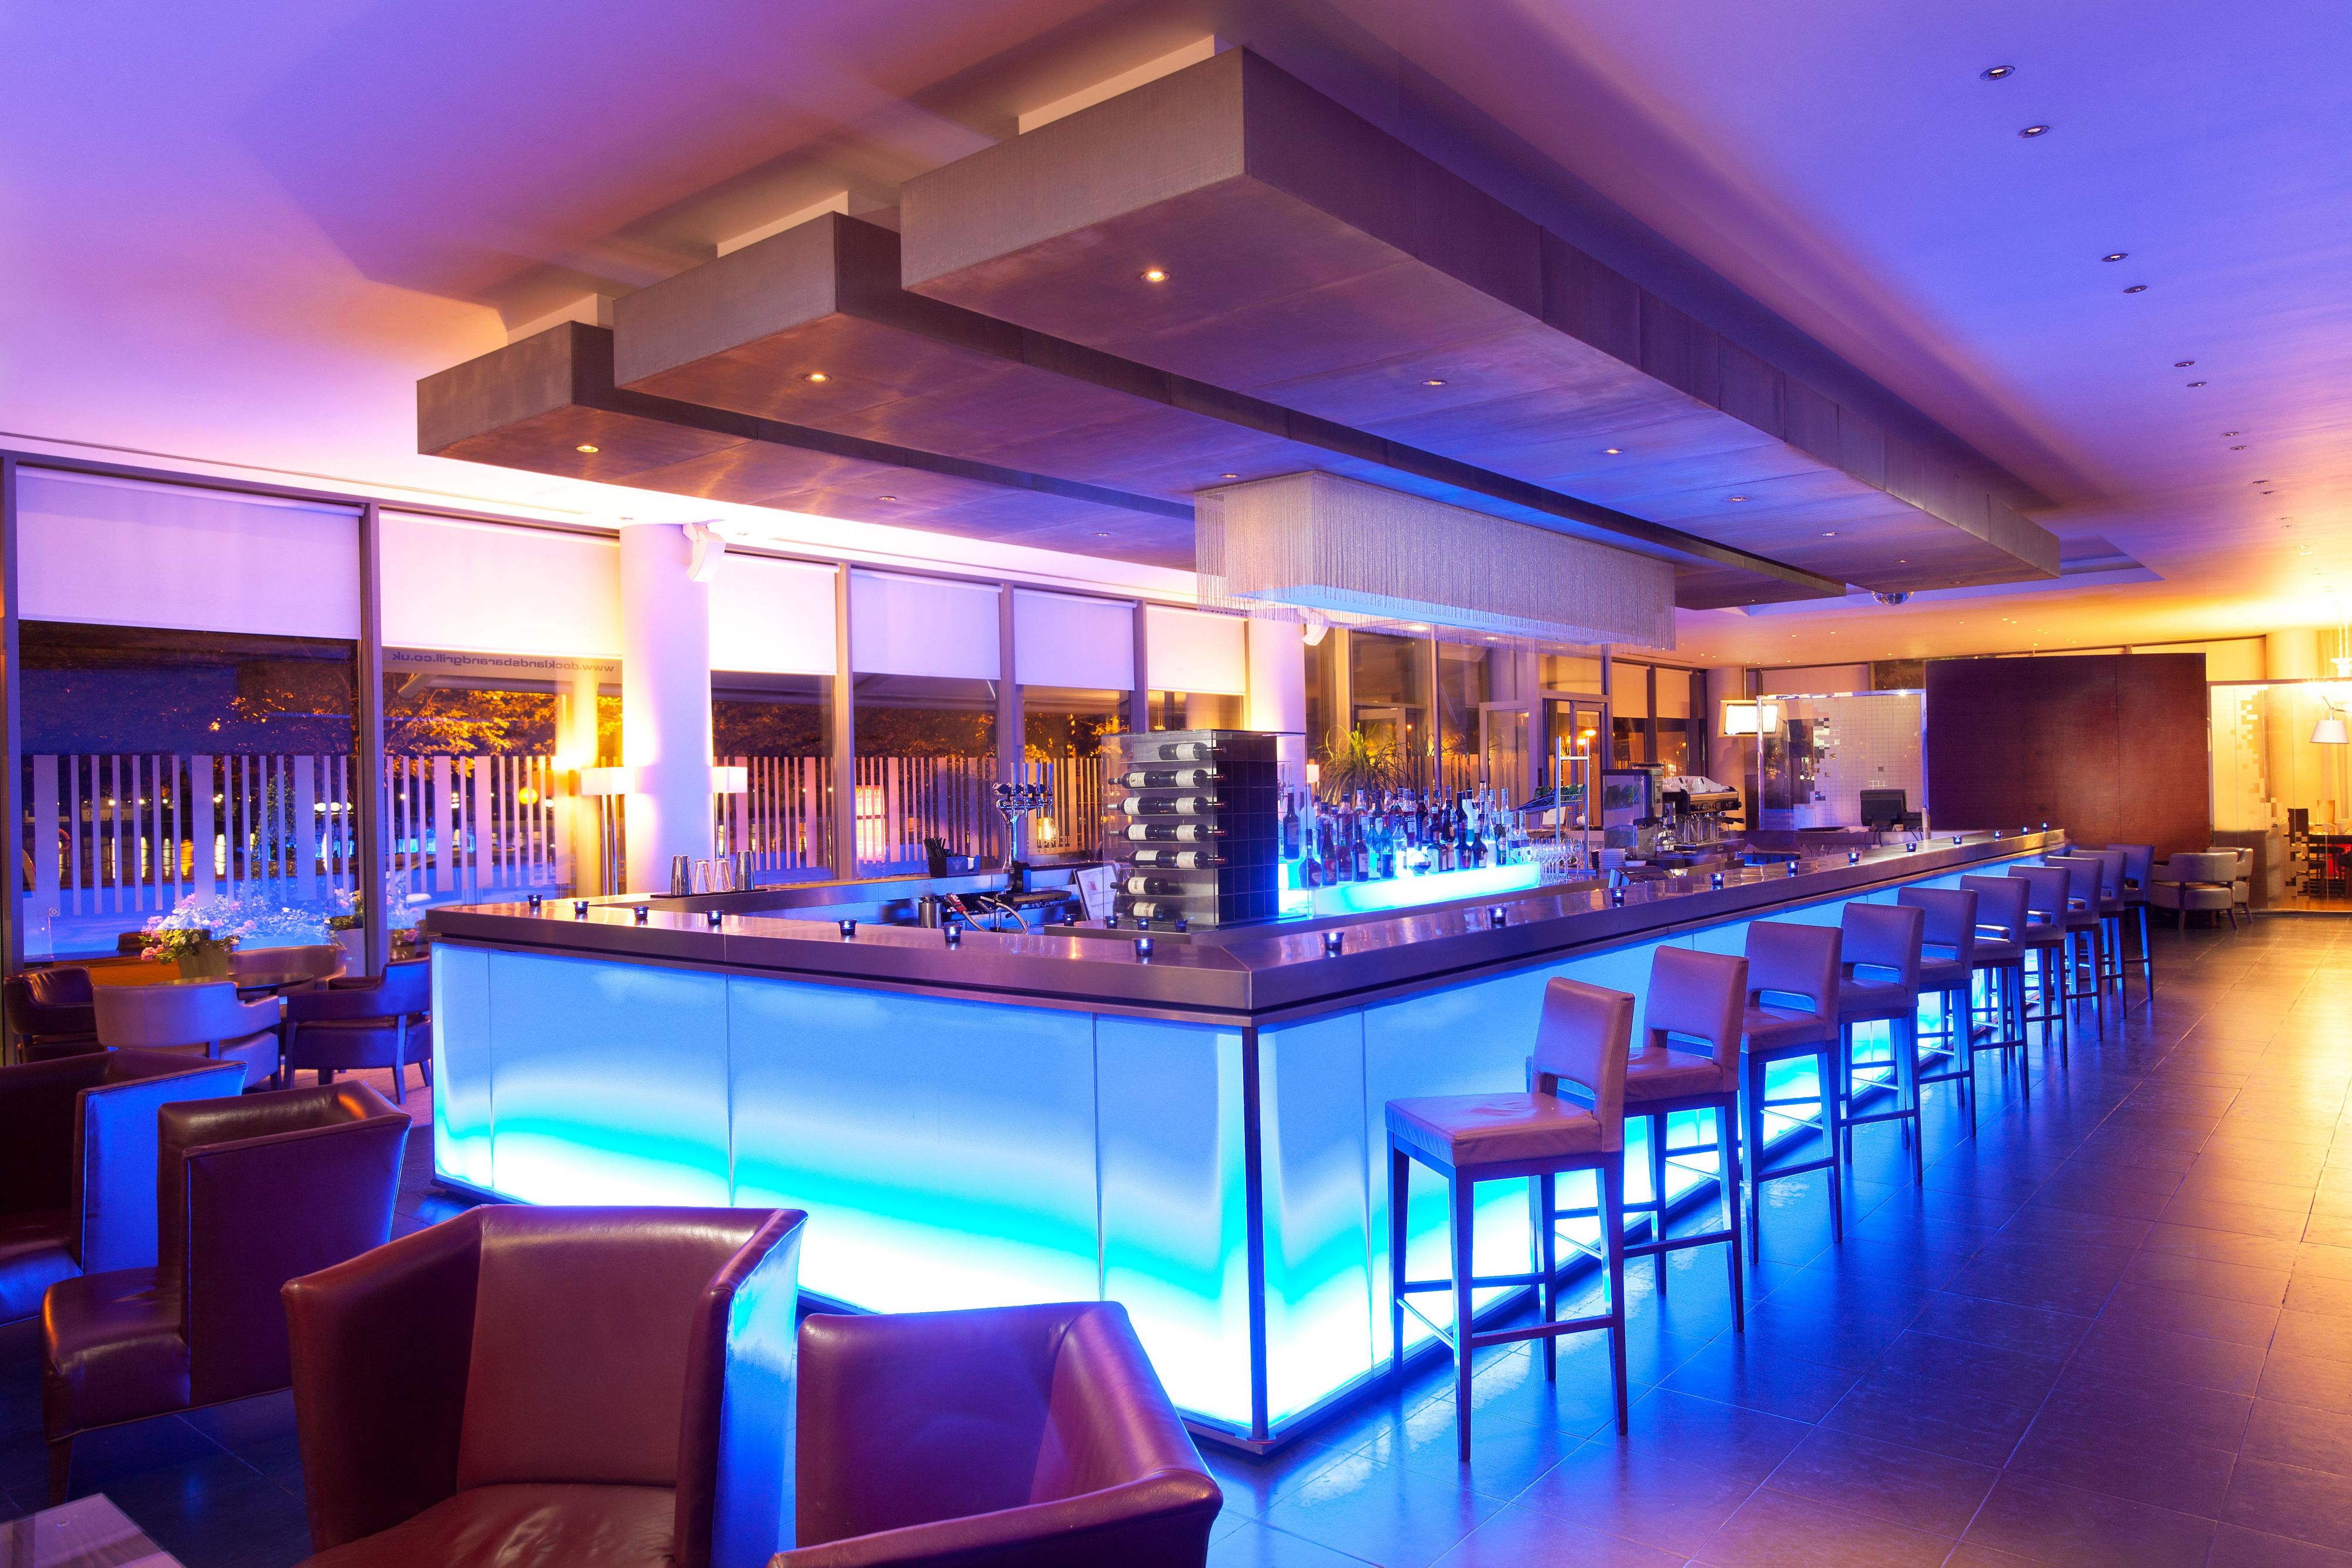 Docklands Bar &amp; Grill serves great drinks and bar food until late